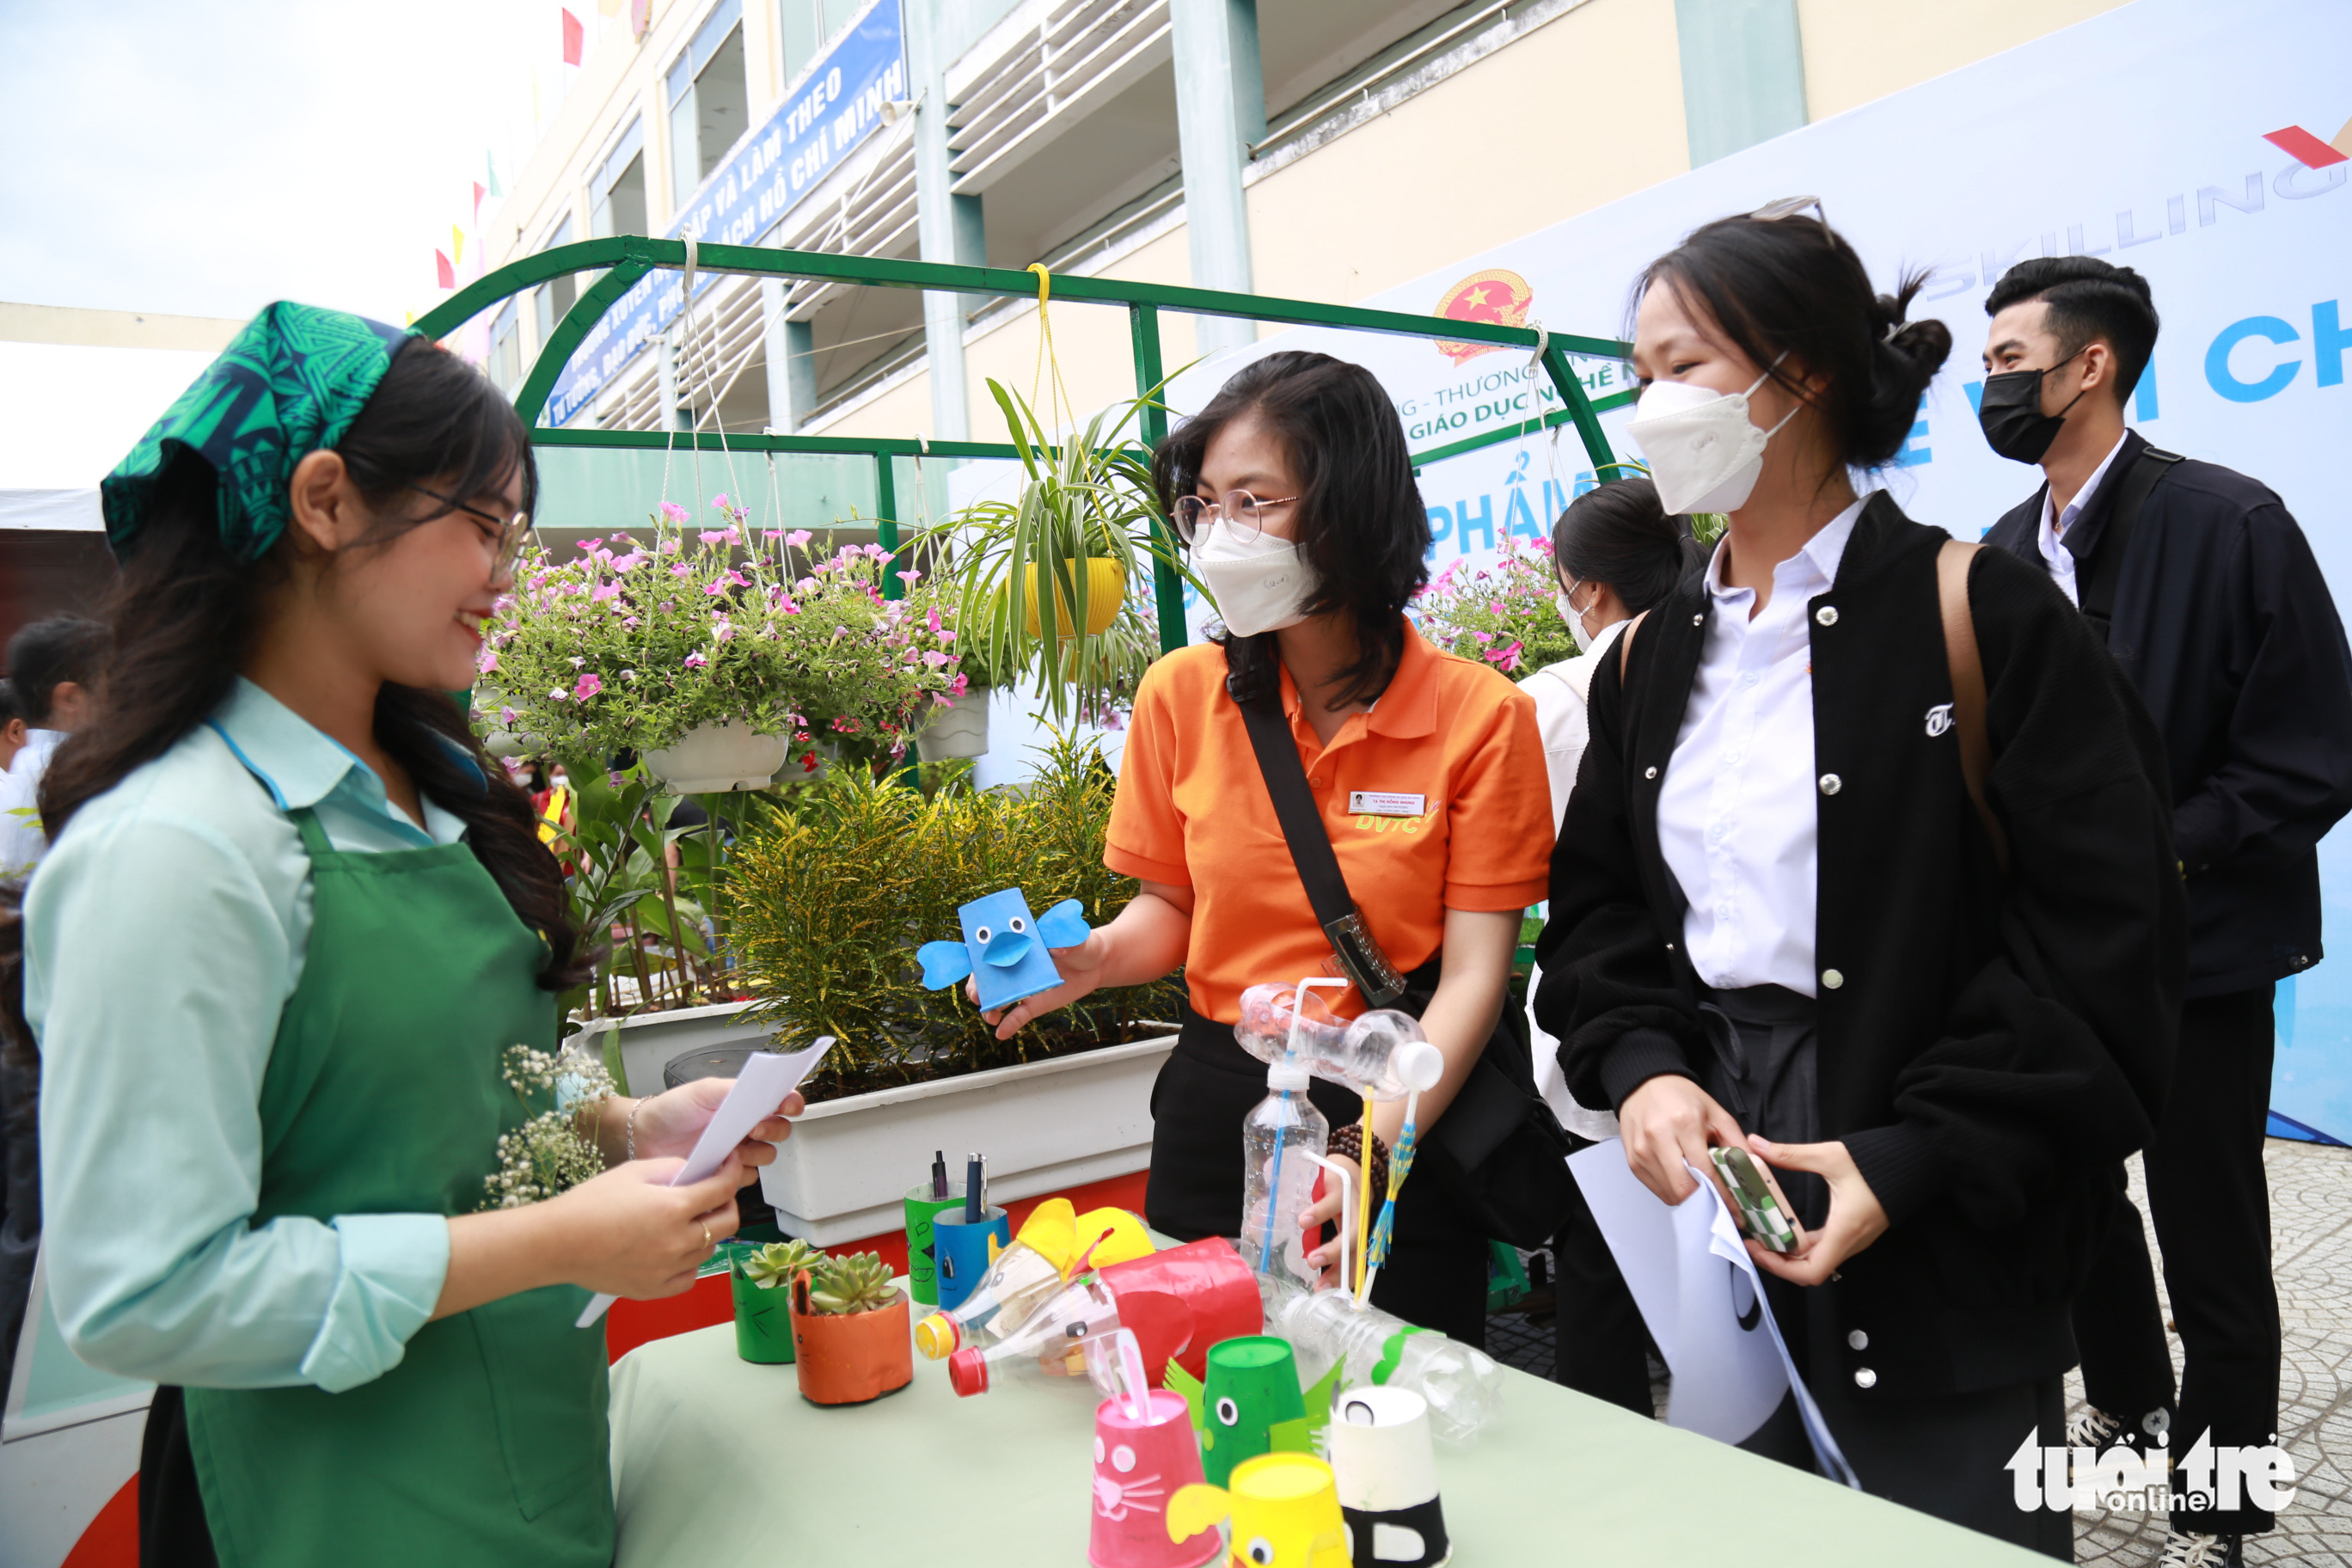 Vocational school students present recycled items at environmental protection event in Da Nang